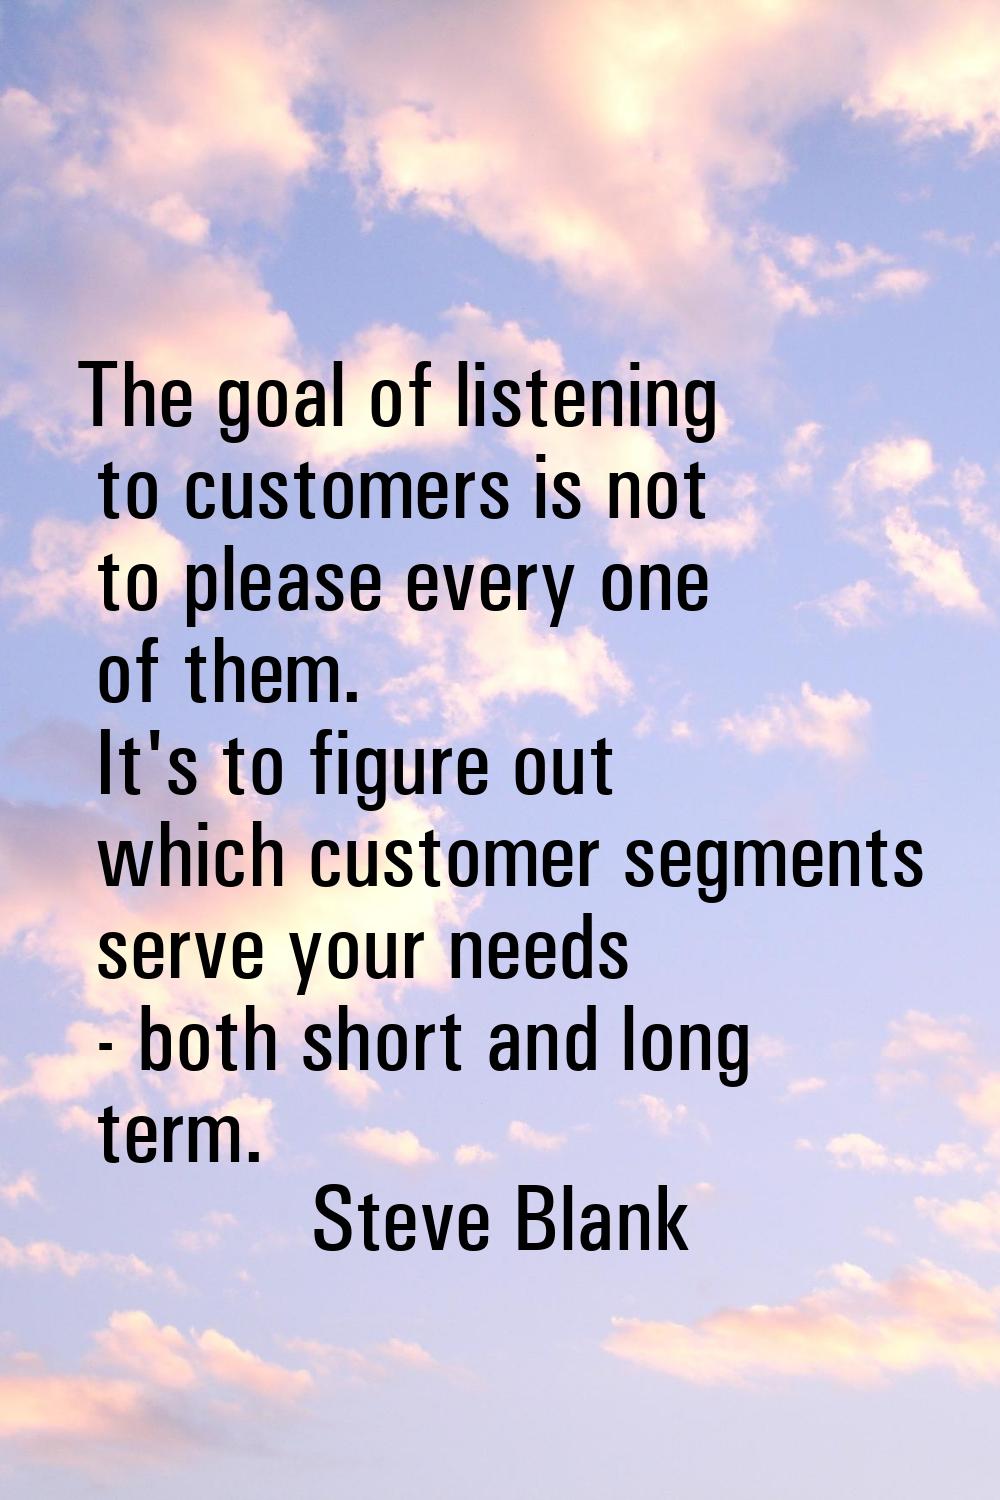 The goal of listening to customers is not to please every one of them. It's to figure out which cus